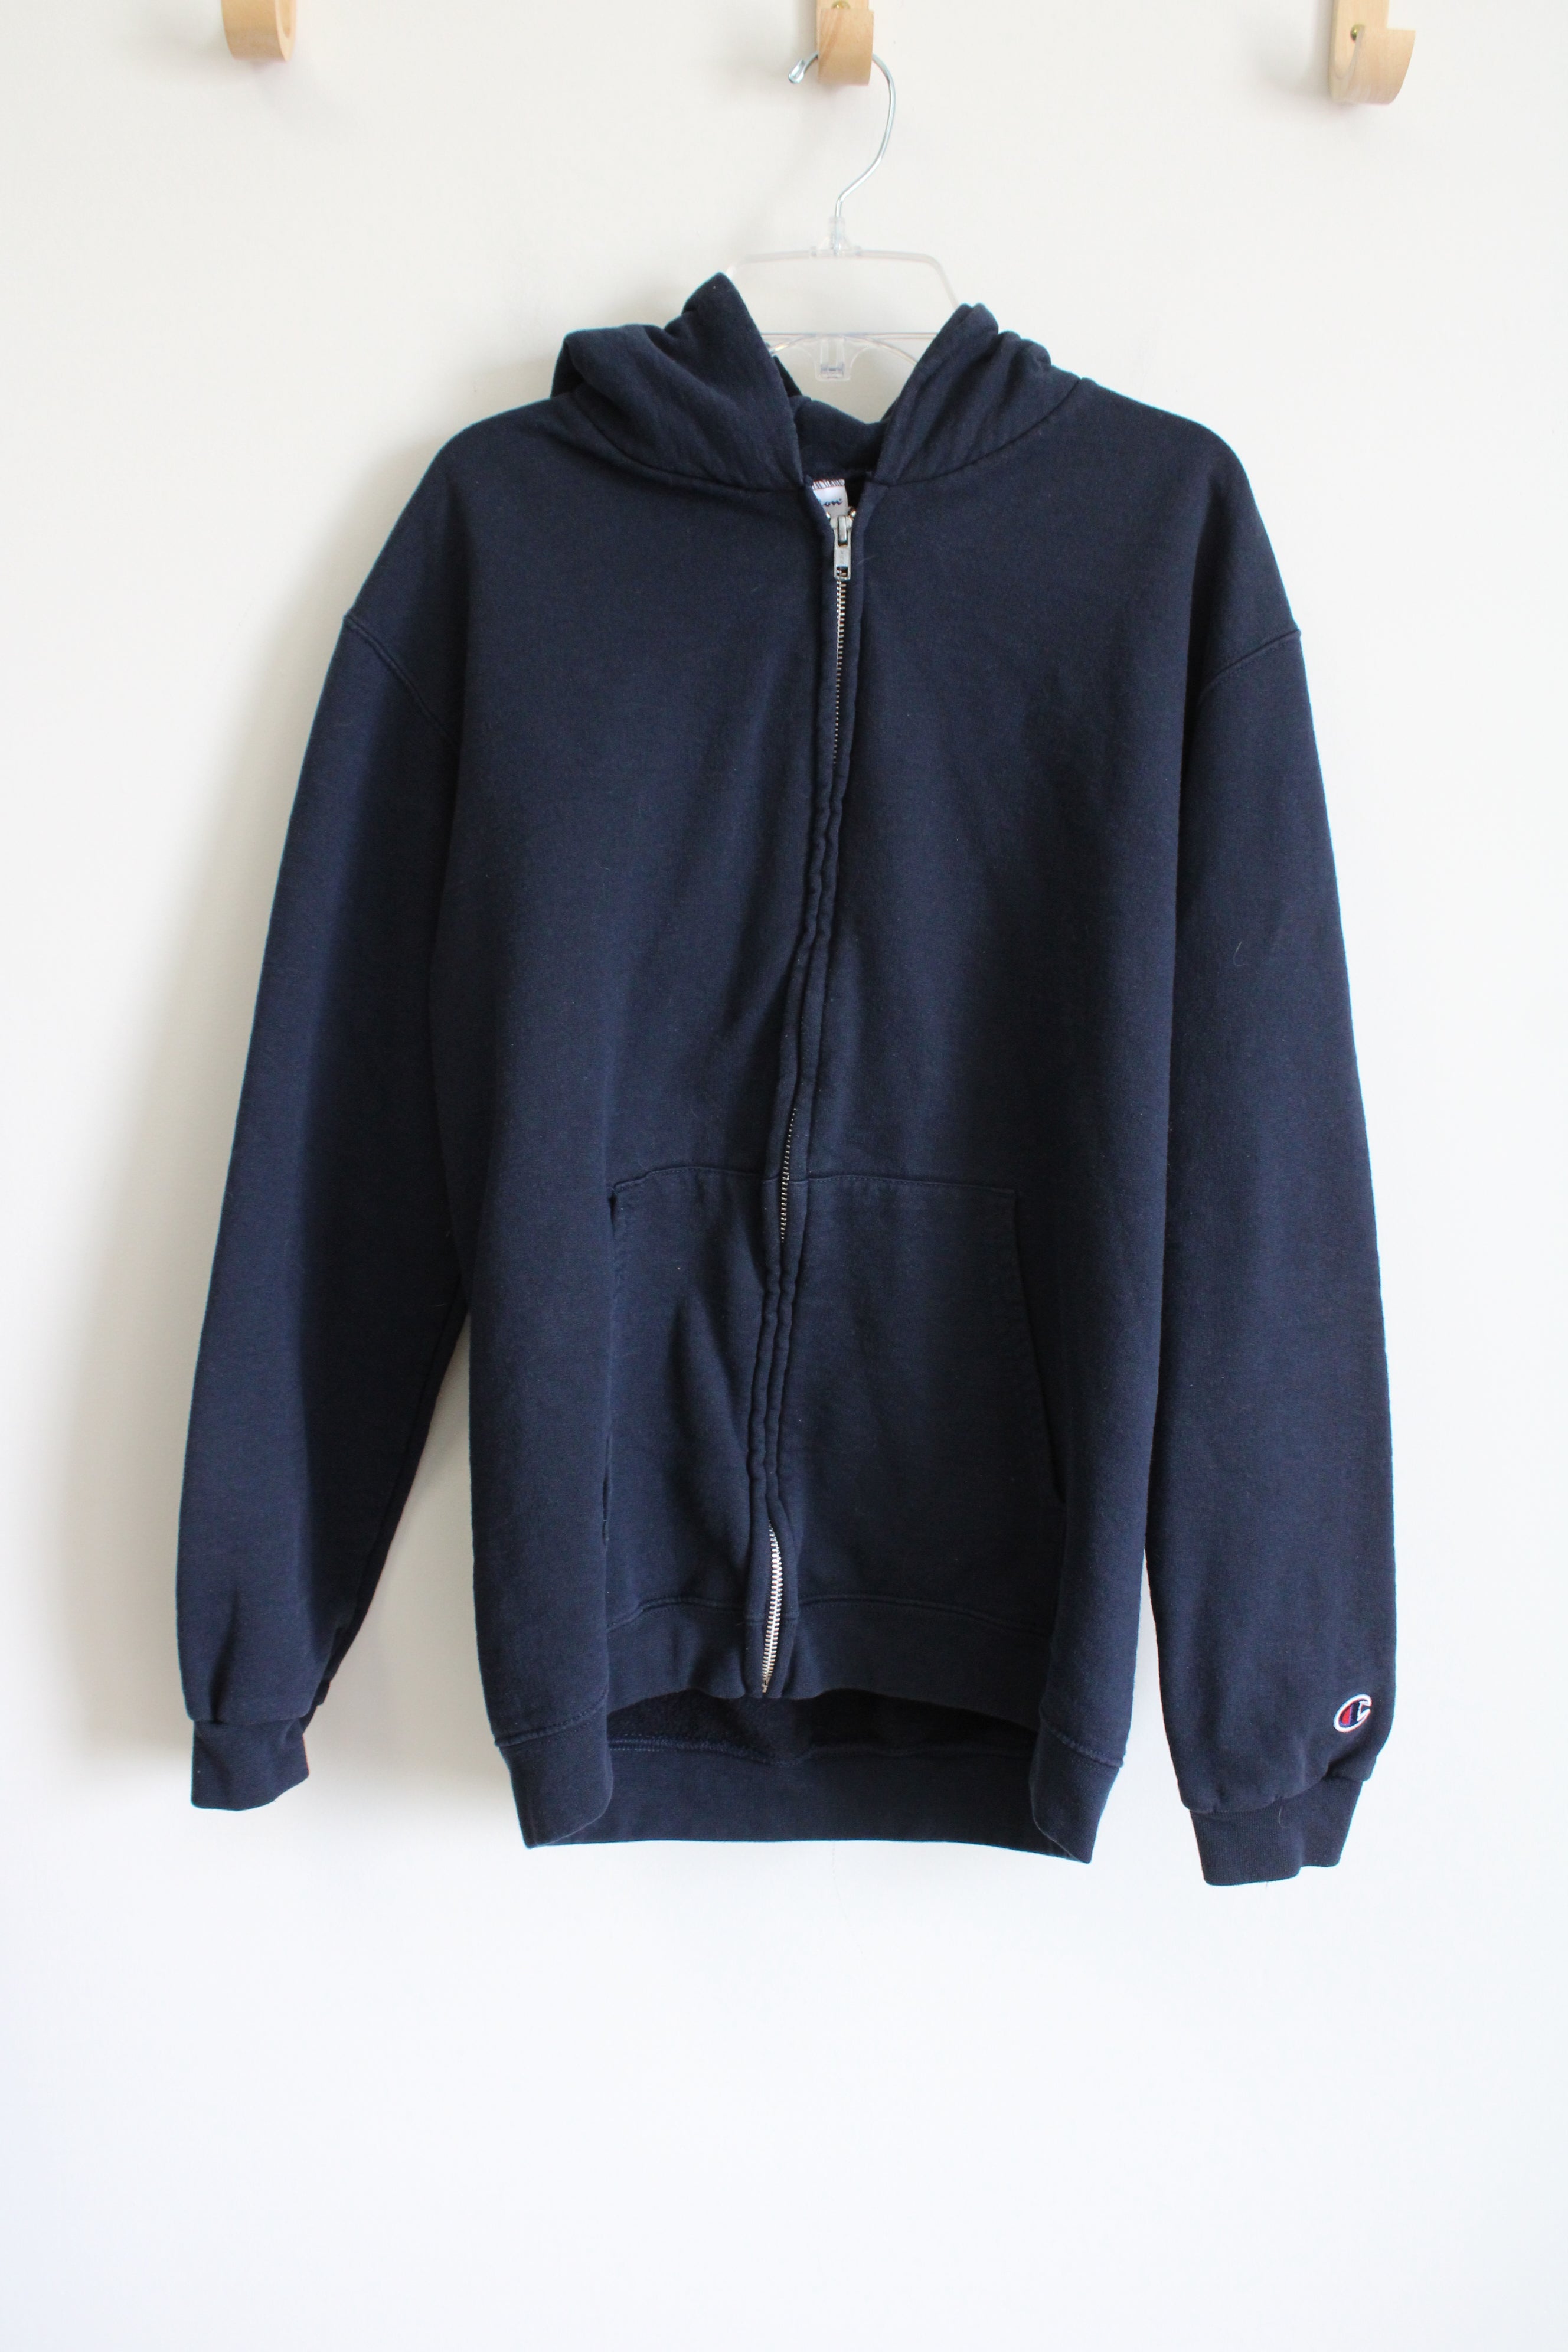 Champion Navy Zip Up Hoodie | Youth XL (18/20)